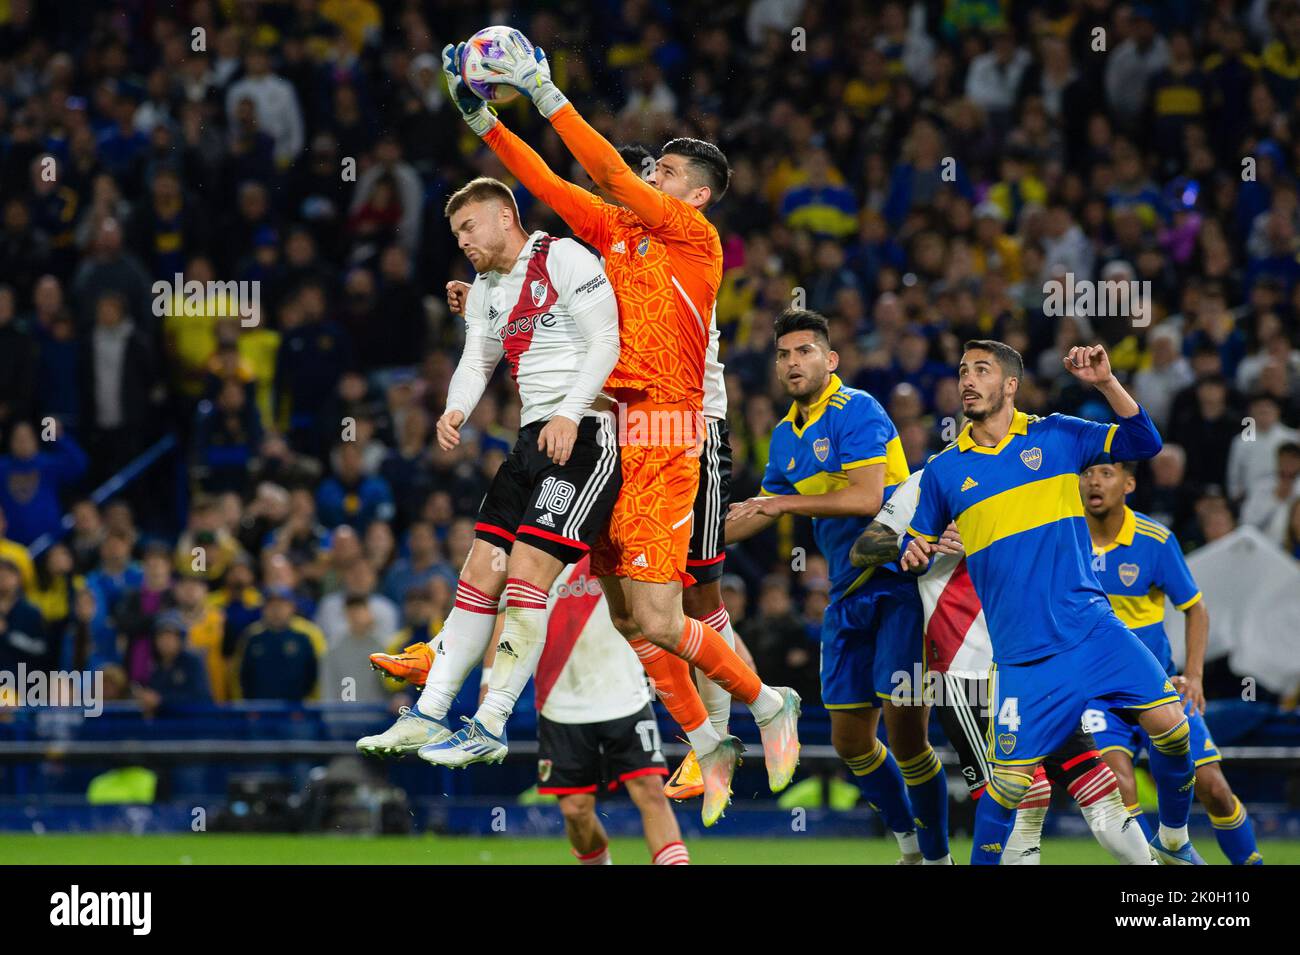 Buenos Aires, Argentina. 11th Sep, 2022. Agustin Rossi (C) of Boca Juniors and Lucas Beltran (L) of River Plate seen in action during a match between Boca Juniors and River Plate as part of Liga Profesional 2022 at Estadio Alberto J. Armando.(Final score; Boca Juniors 1:0 River Plate) (Photo by Manuel Cortina/SOPA Images/Sipa USA) Credit: Sipa USA/Alamy Live News Stock Photo